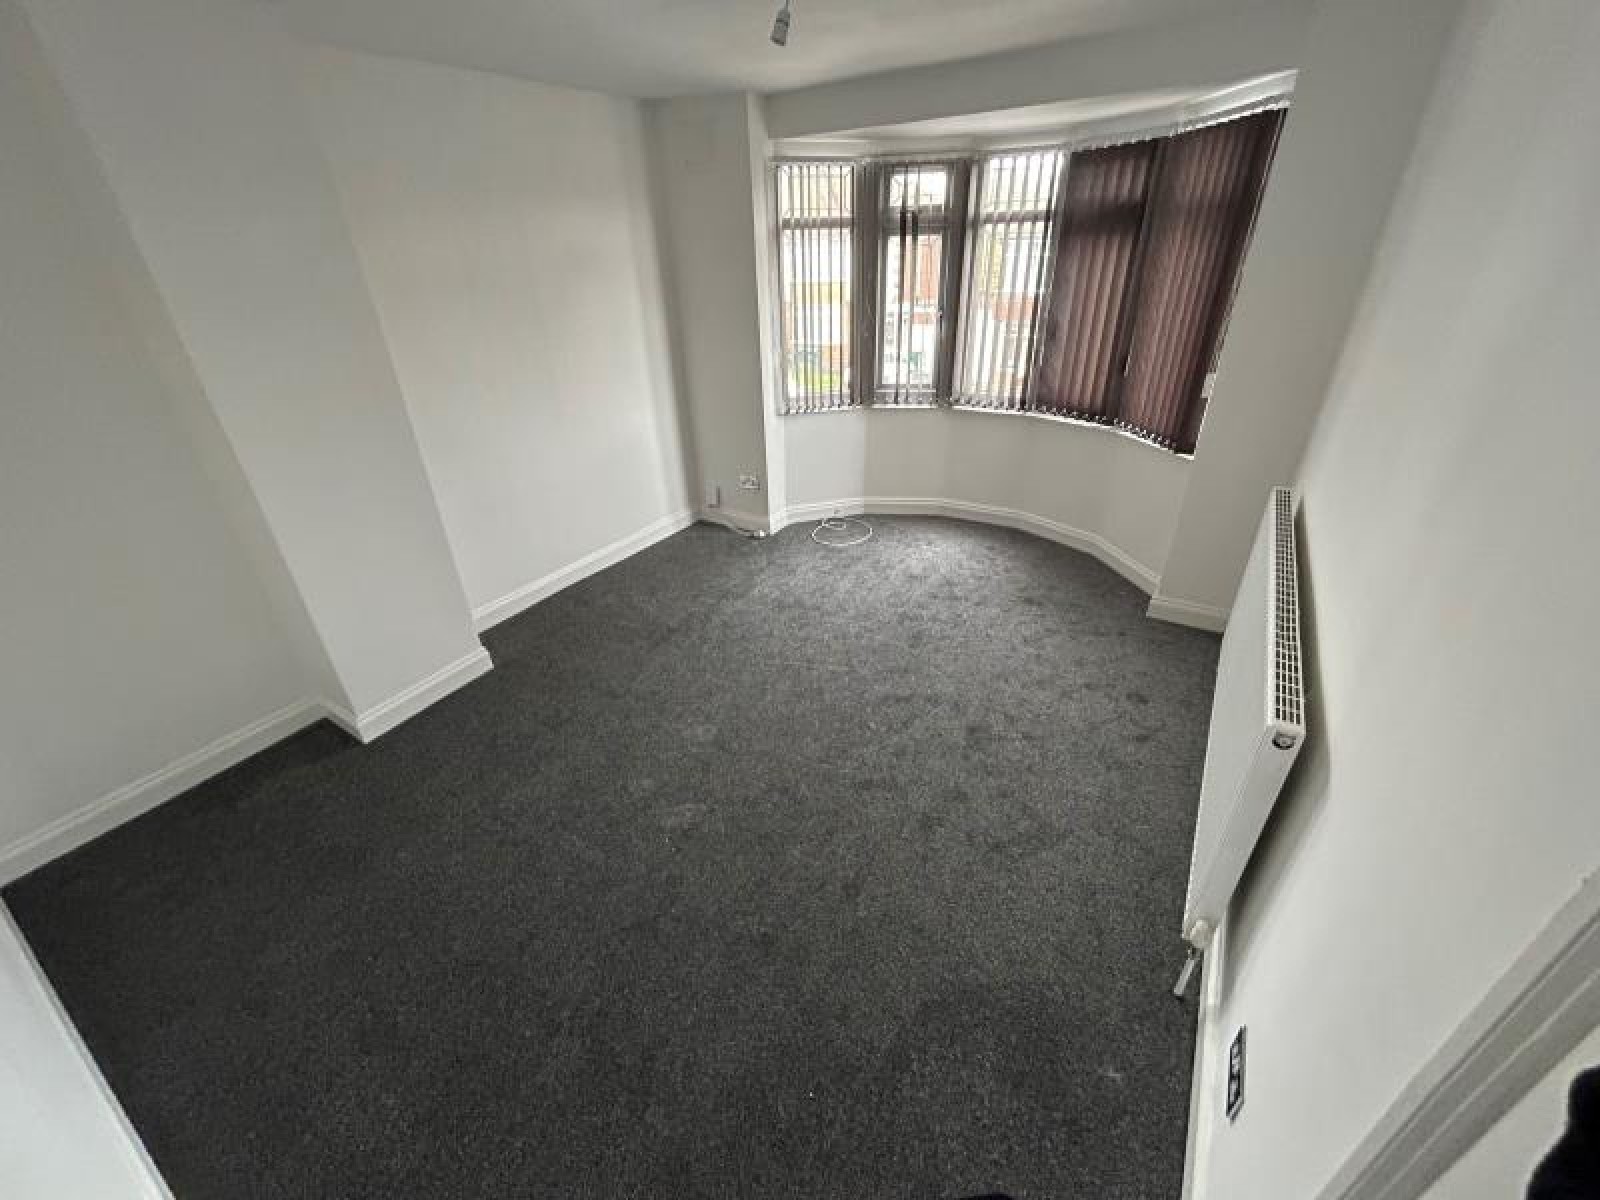 Images for Arnold Avenue, Coventry, Cv3 5lx